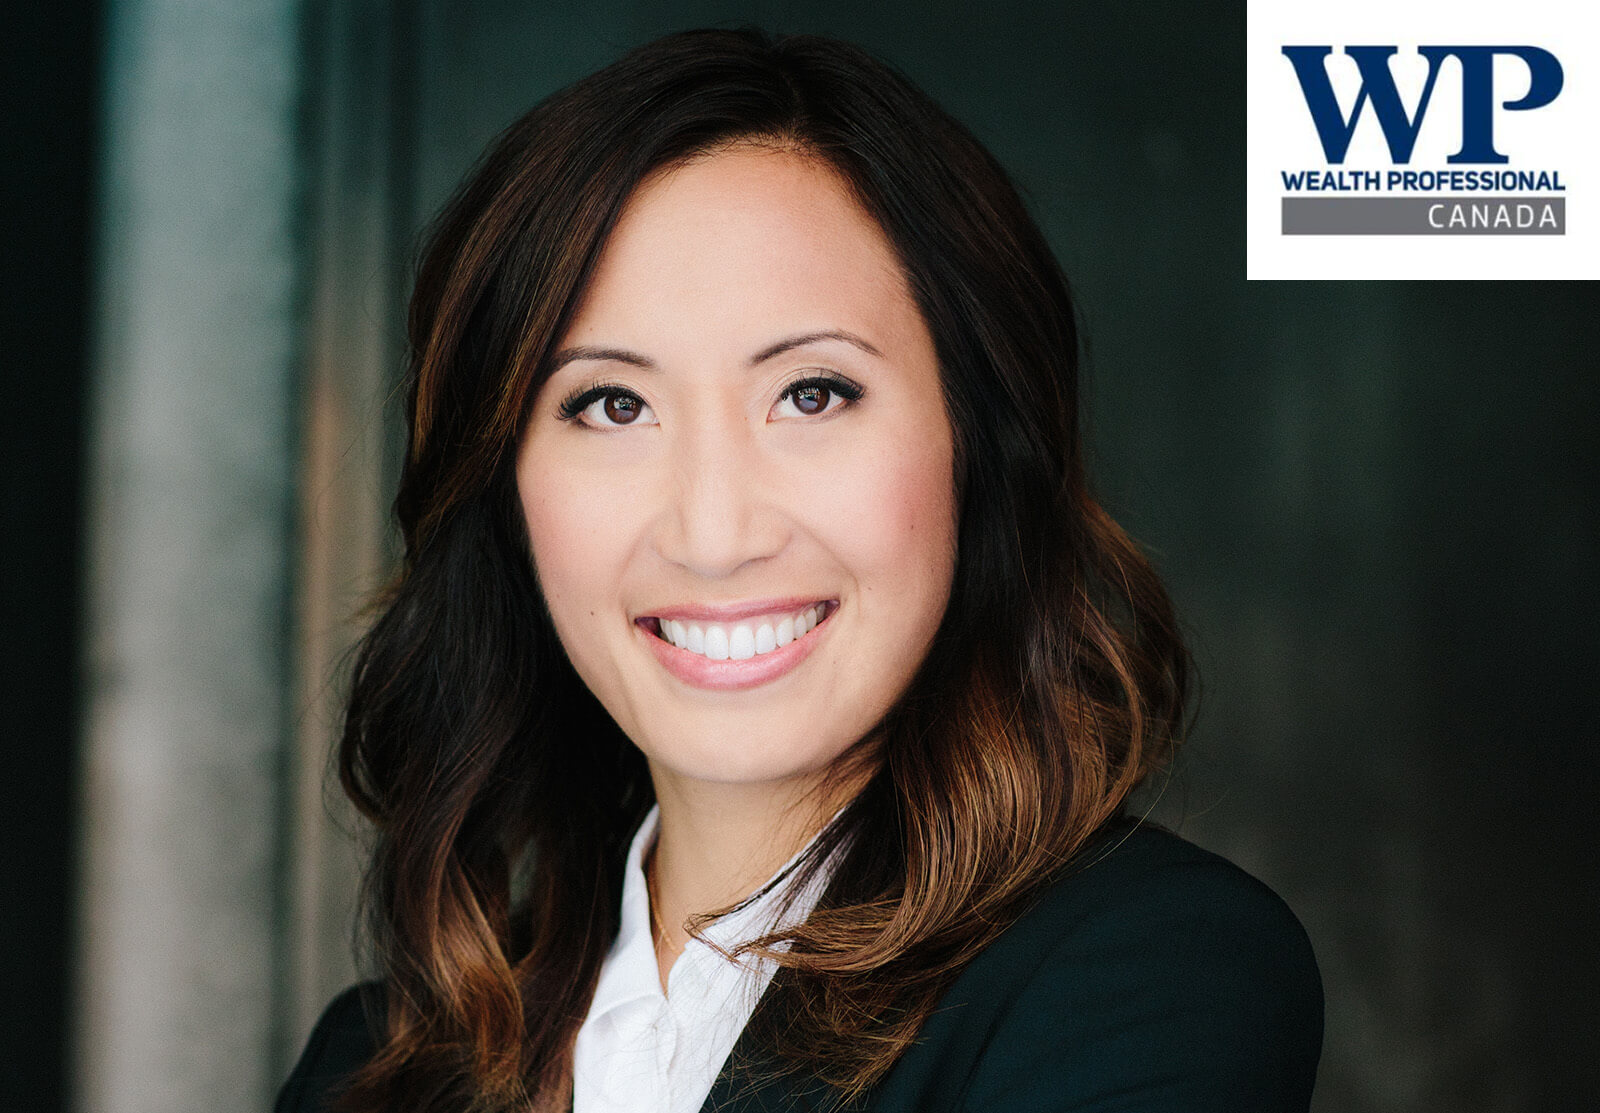 Wealth Professional Canada: Maili Wong named a 5-Star Leading Woman in Wealth in 2022